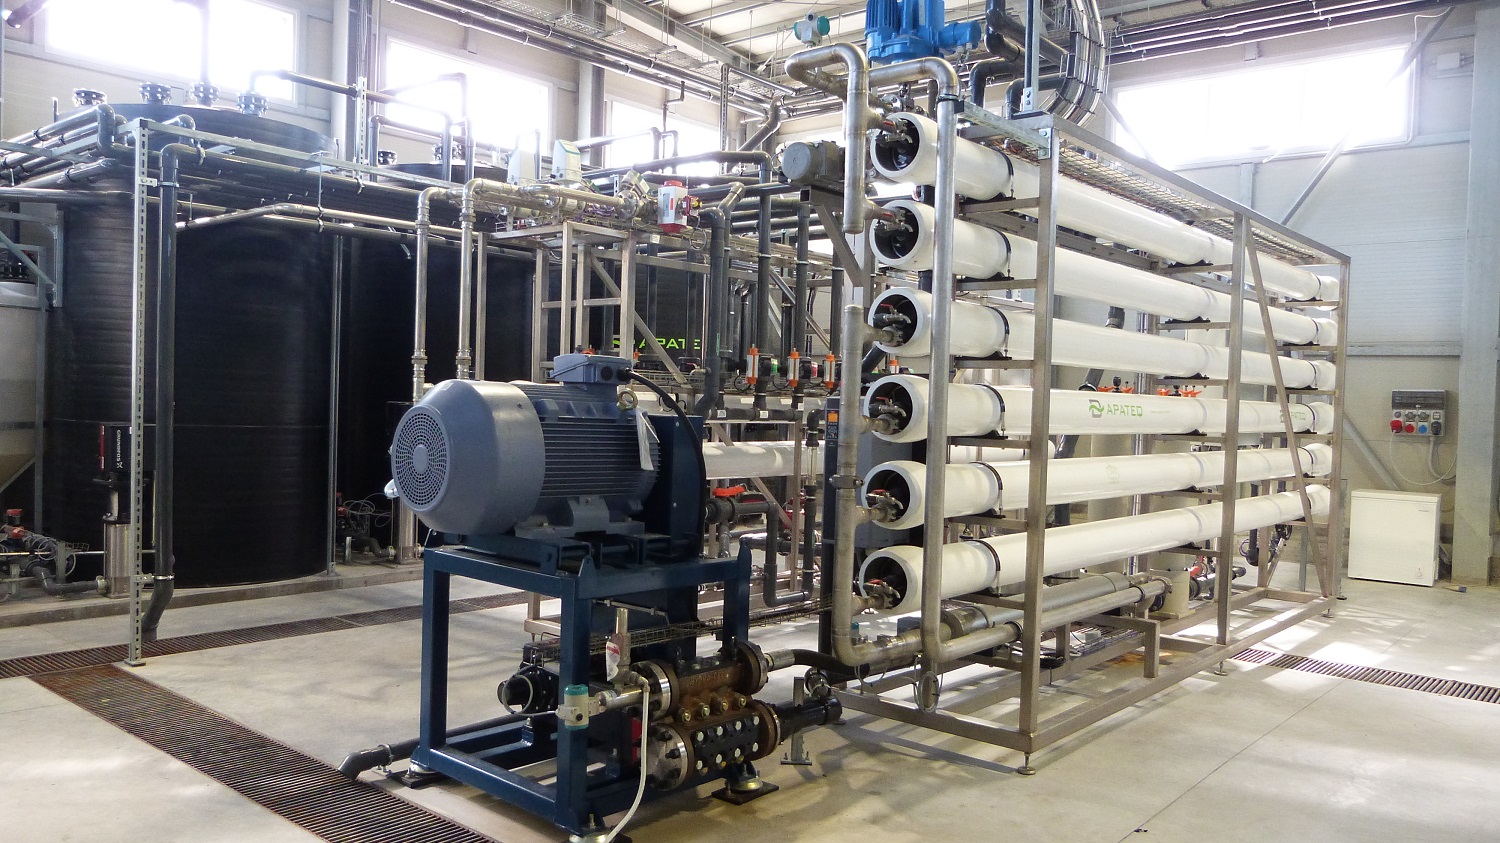 Wanner has supplied three of its Hydra-Cell T100 ultra-high-pressure reverse osmosis (RO) process pumps to Apateq.